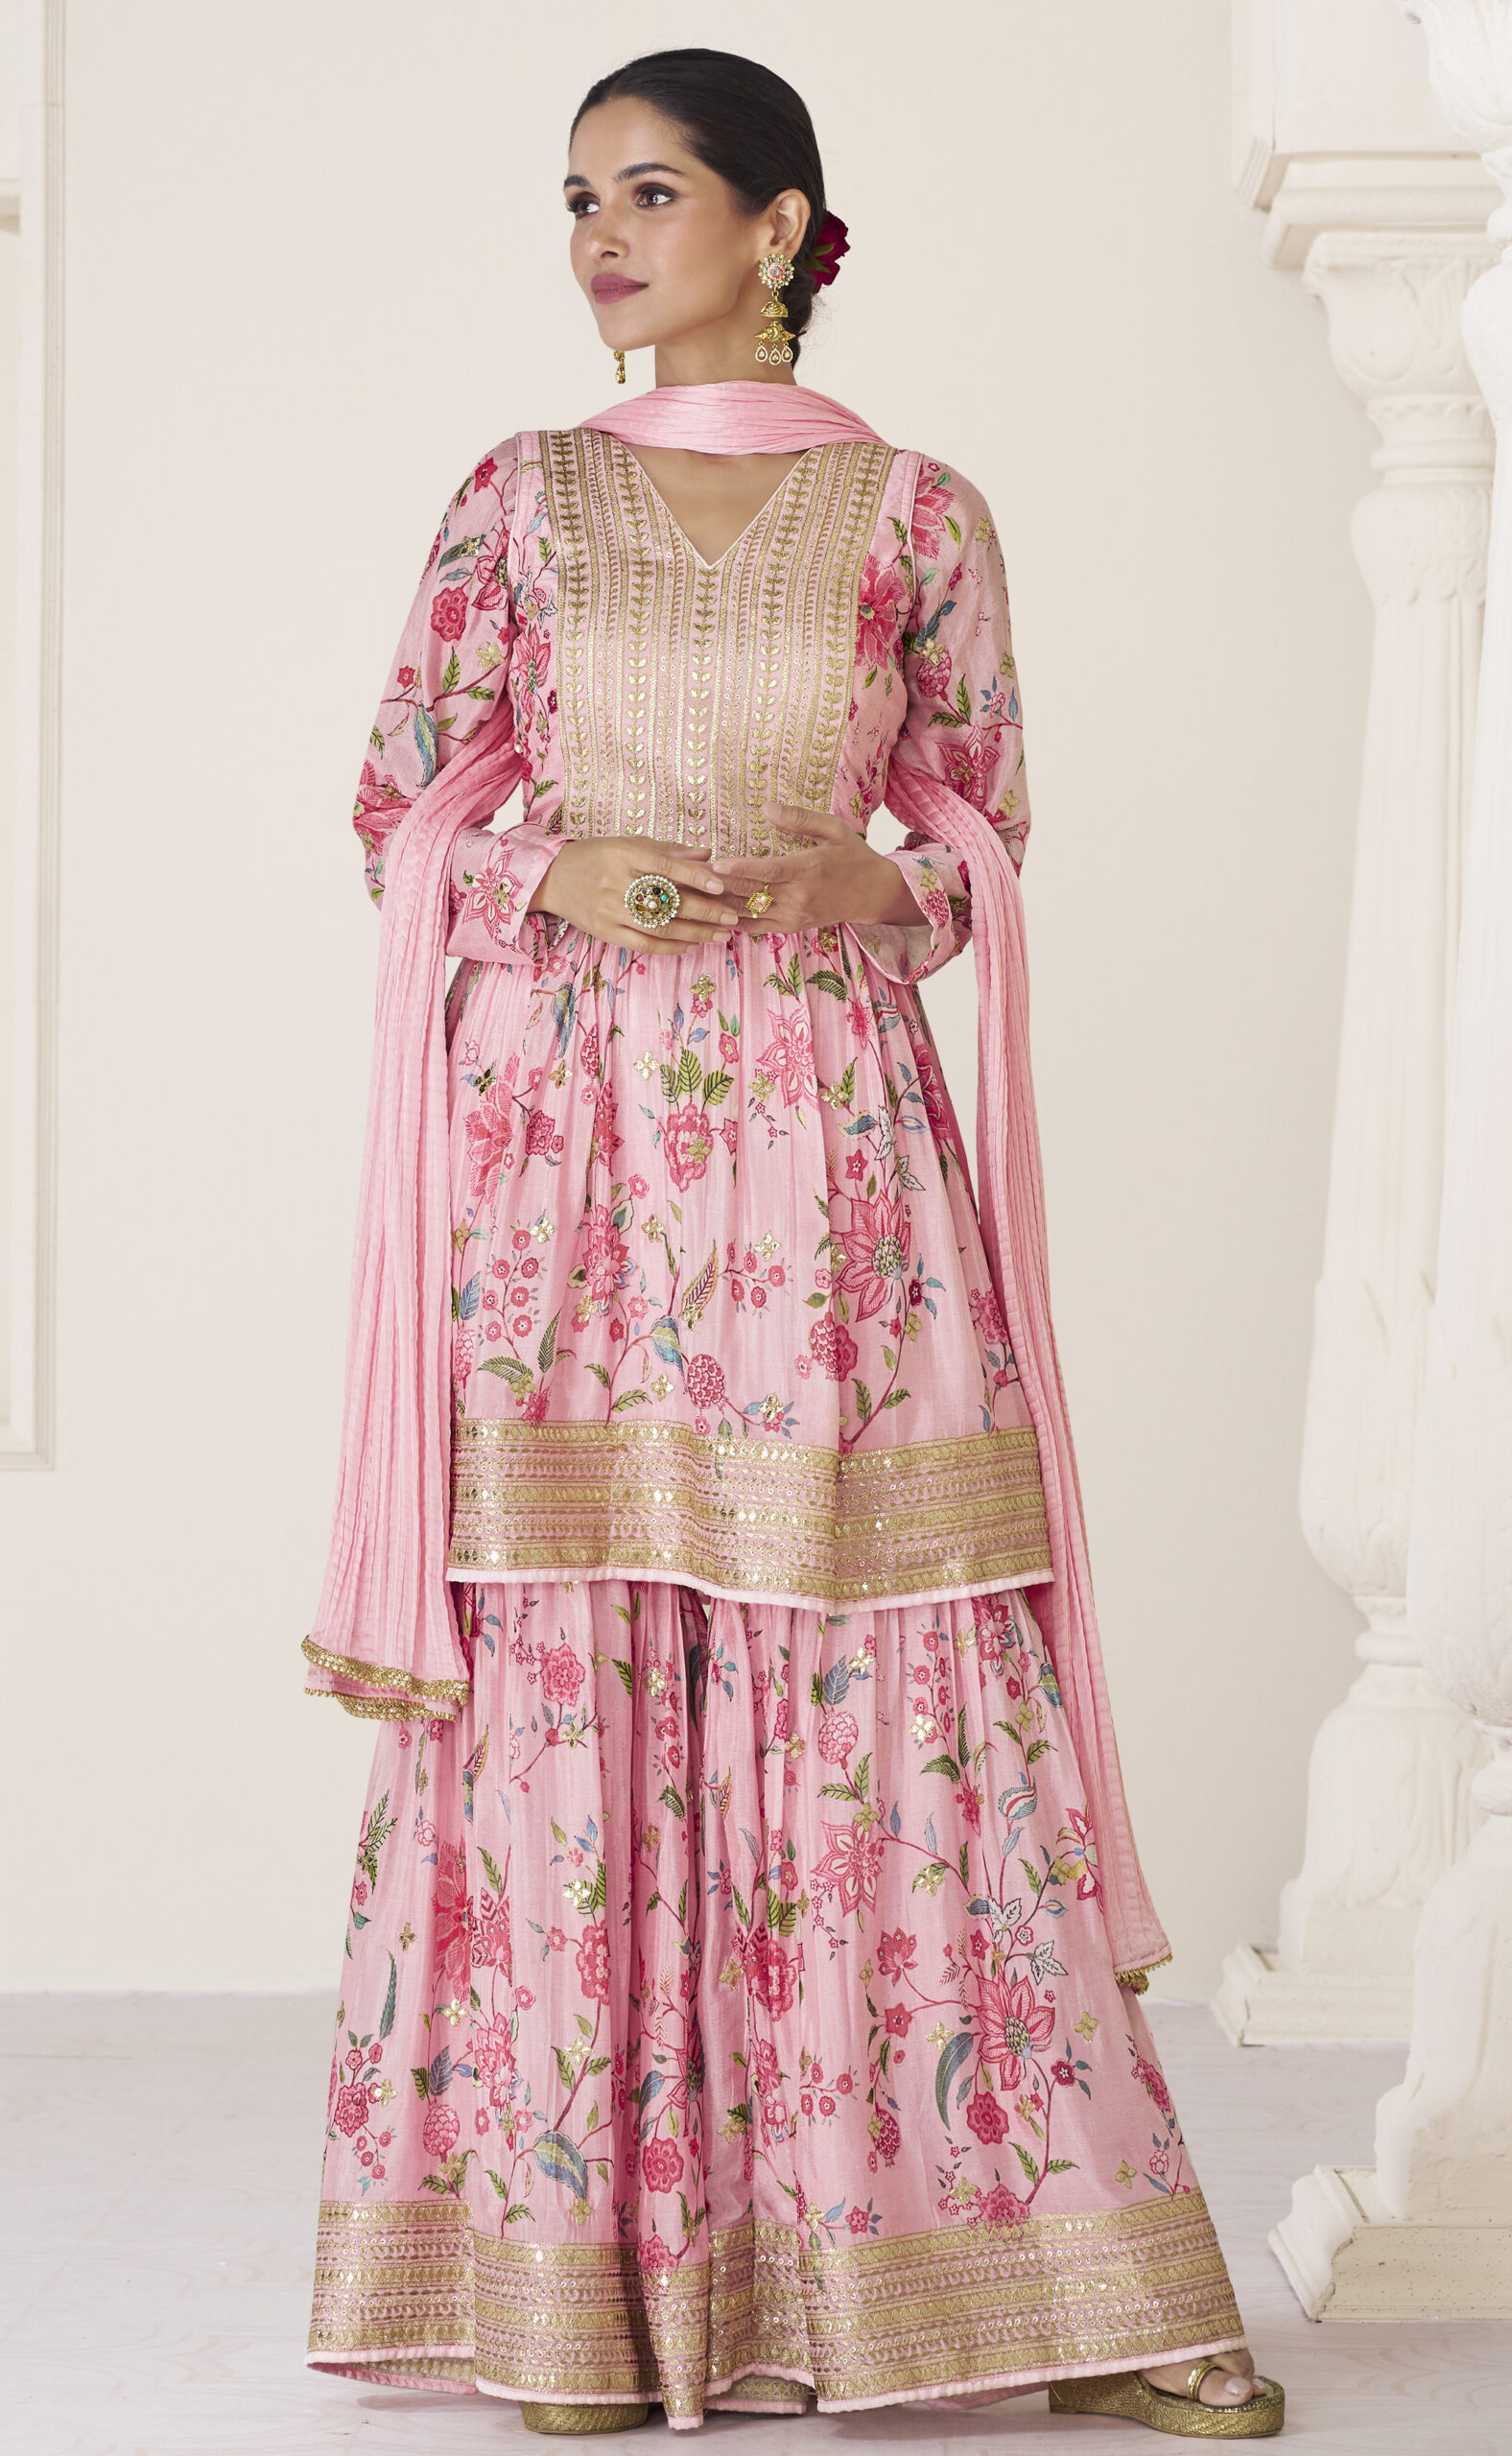 New Salwar Suit Patterns for Ladies in Pink Colour